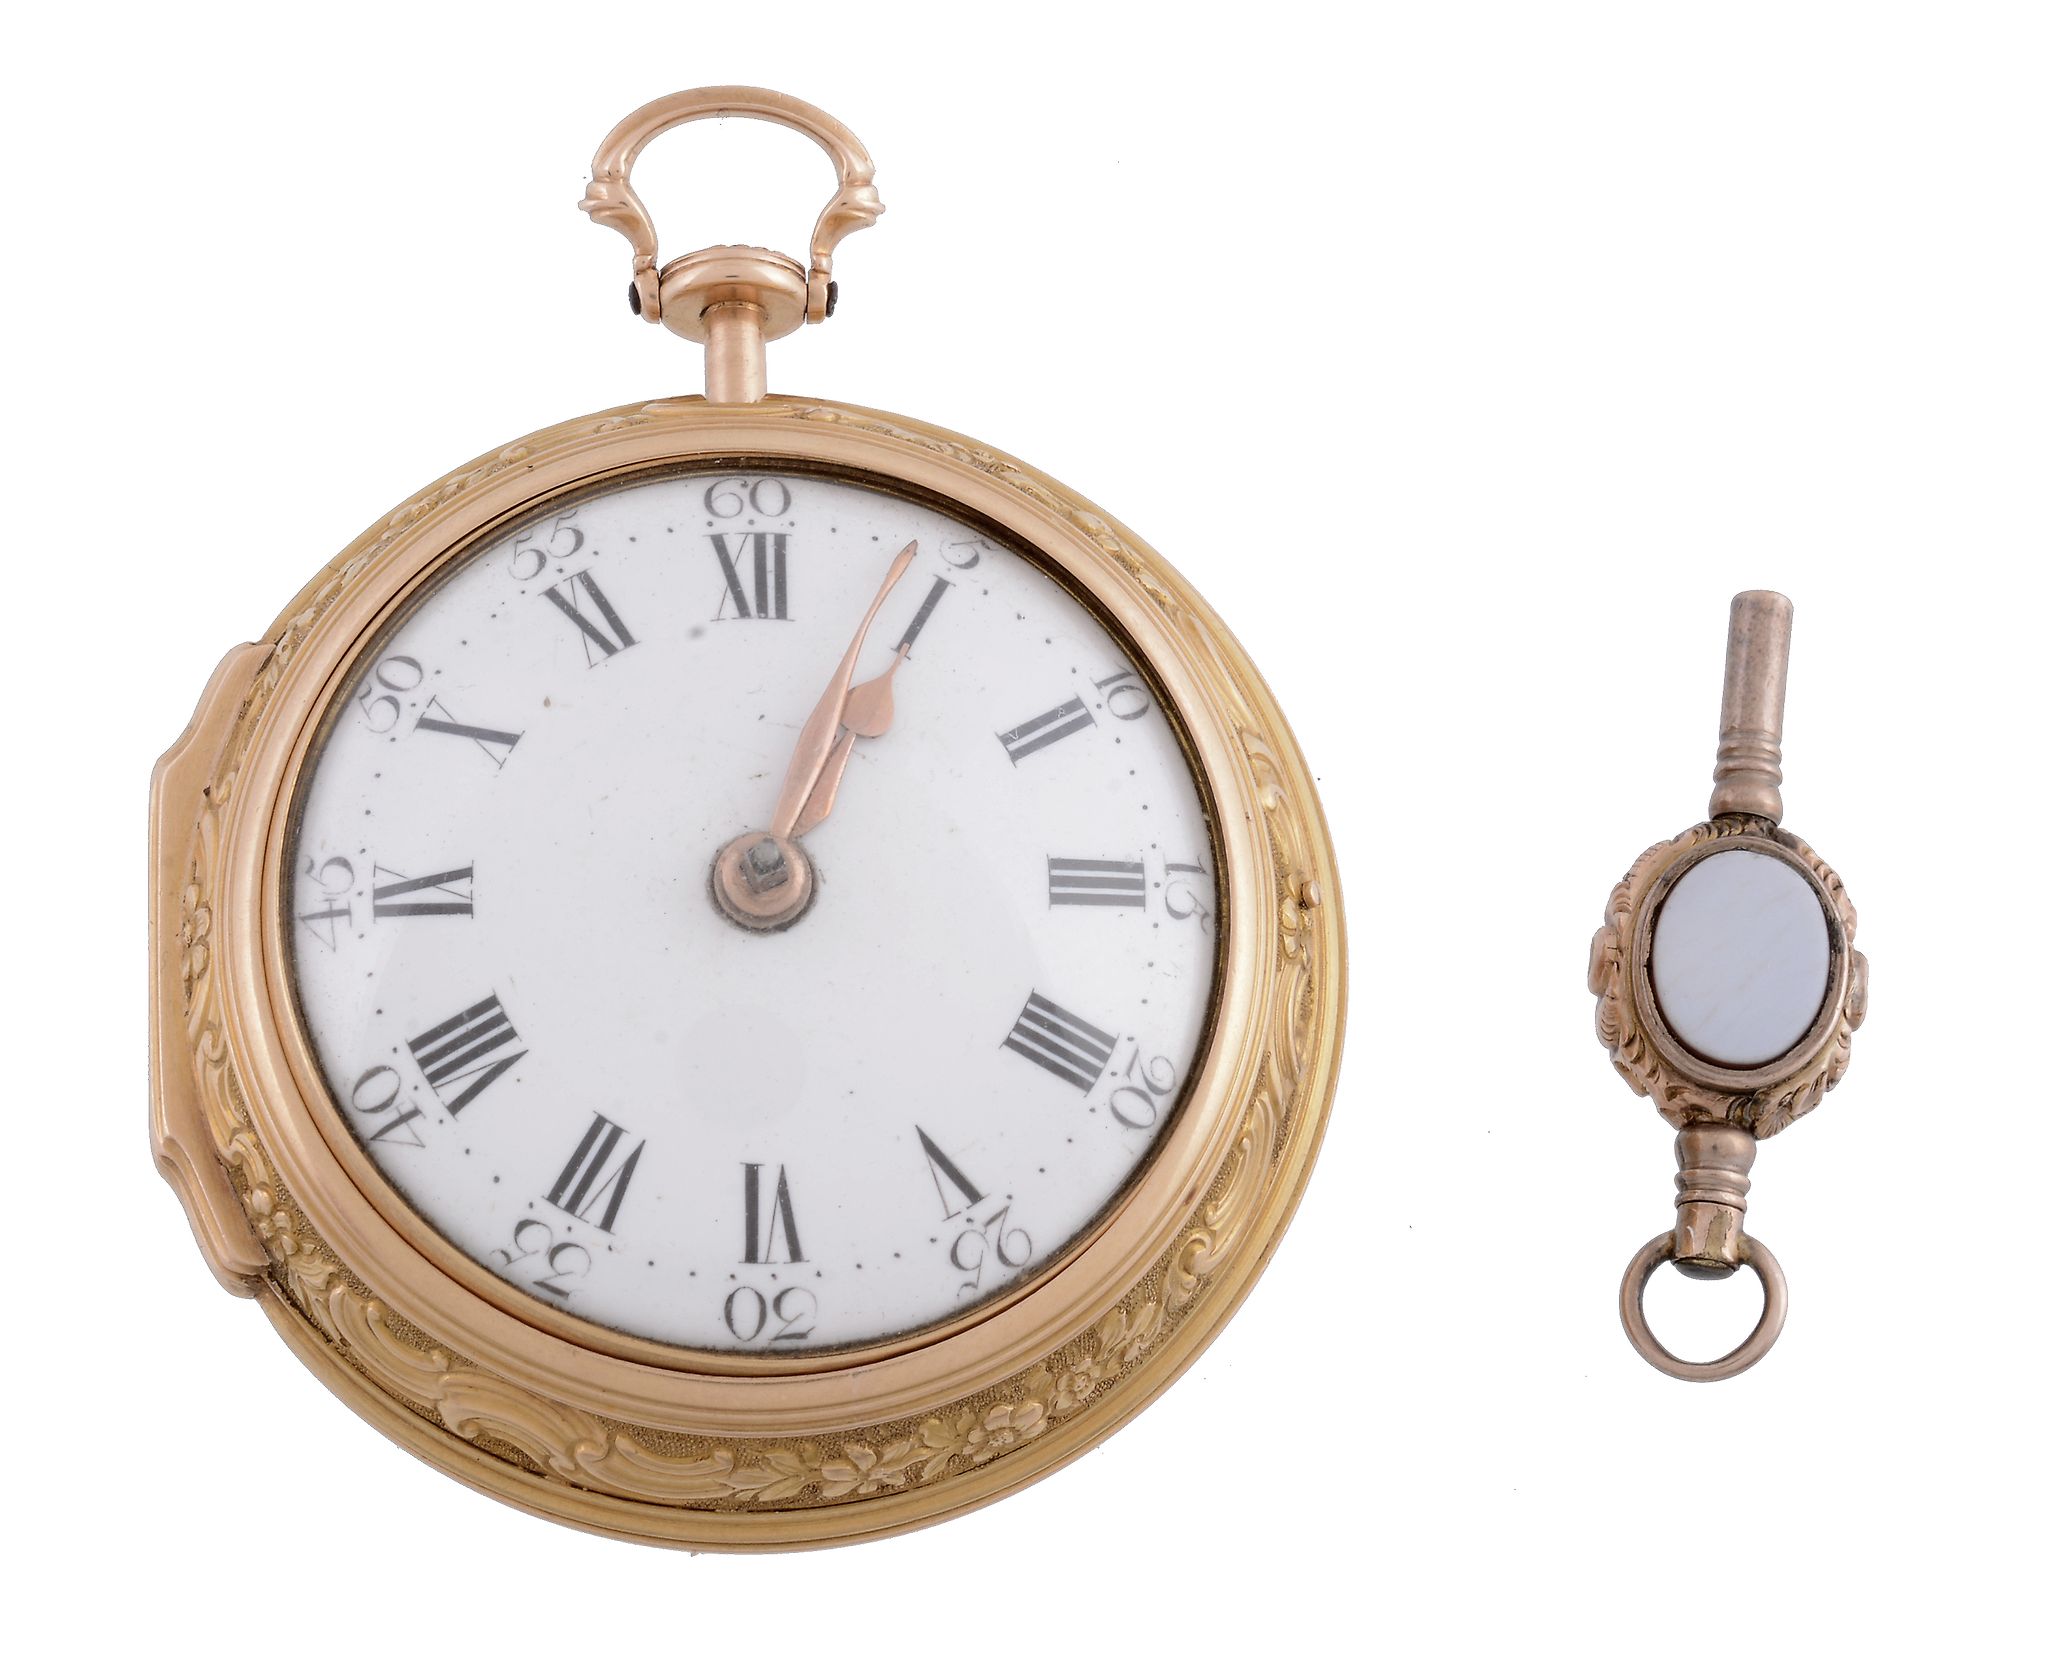 Wm. Turner, London, a 22 carat gold repousse pair cased pocket watch,   no. 9300, the inner case